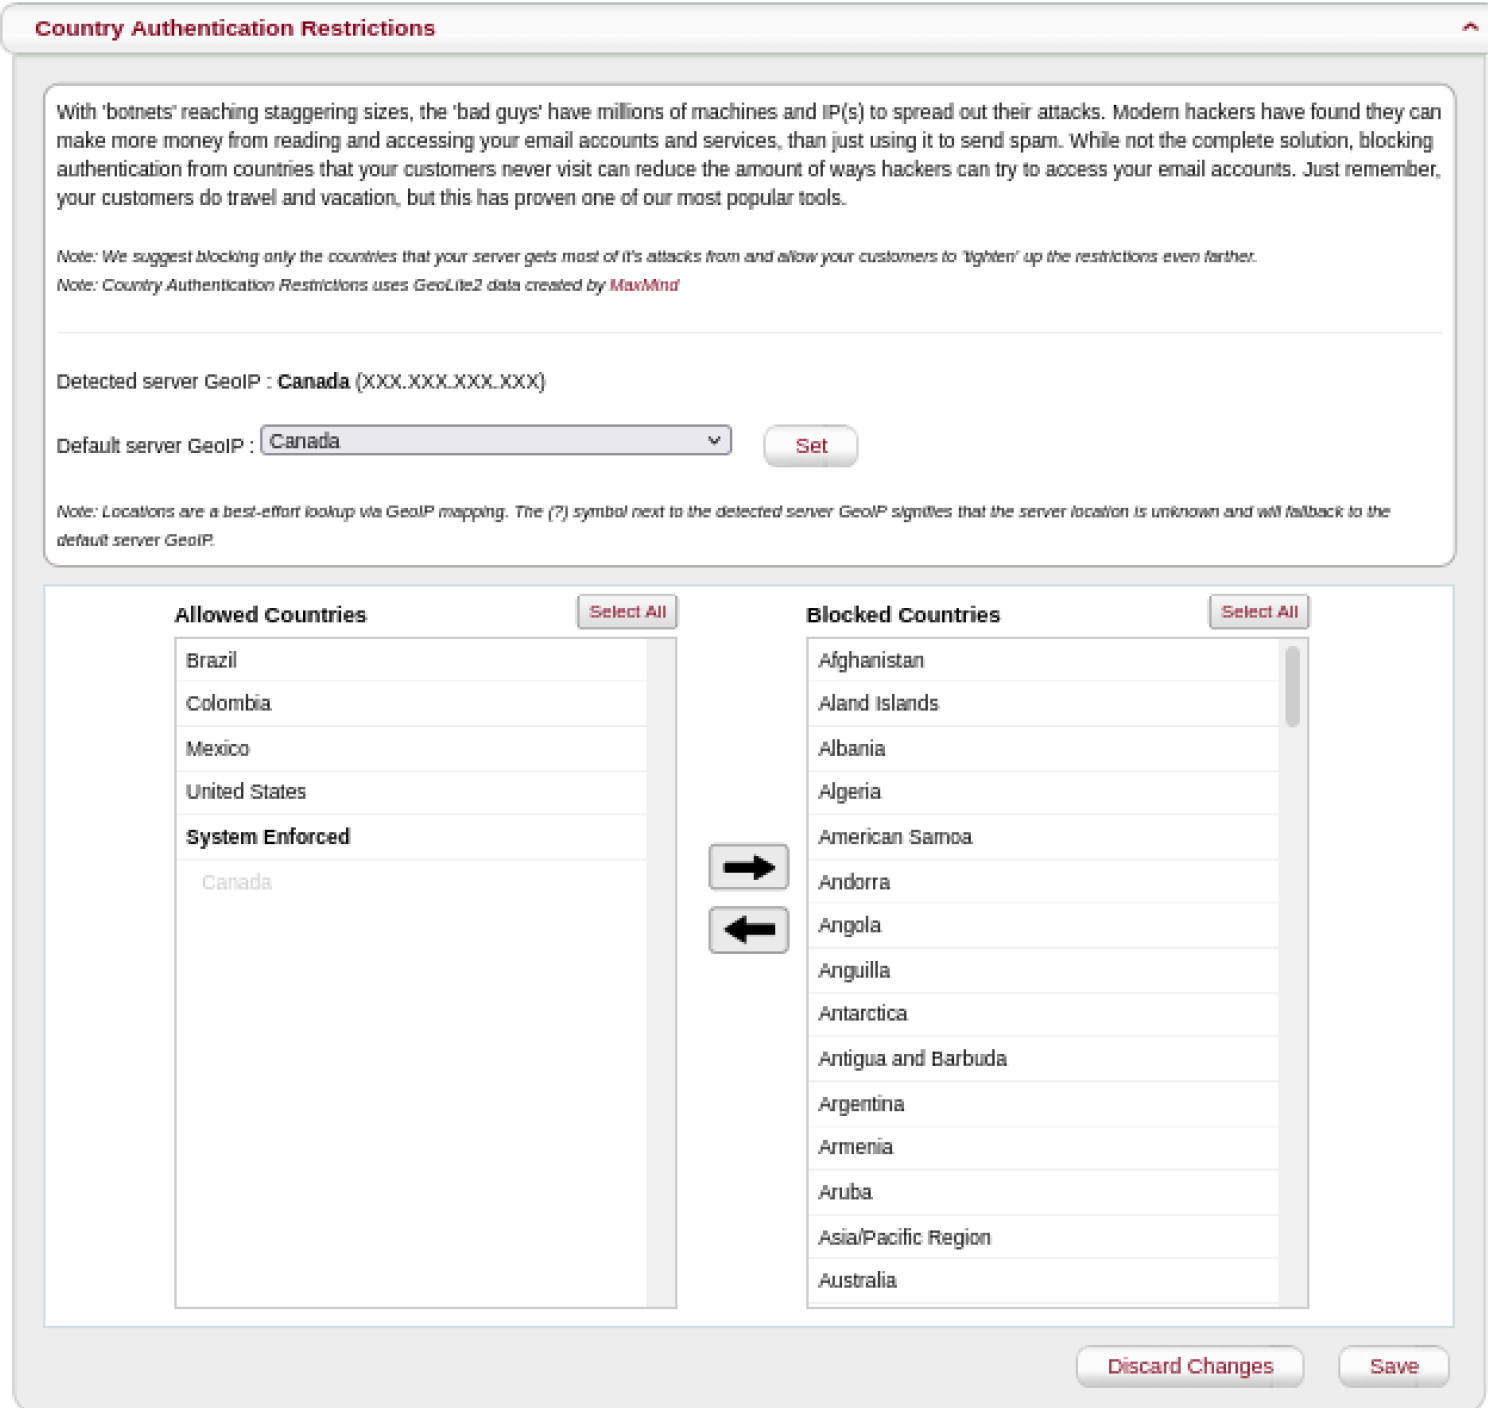 Screenshot of country authentication restrictions page